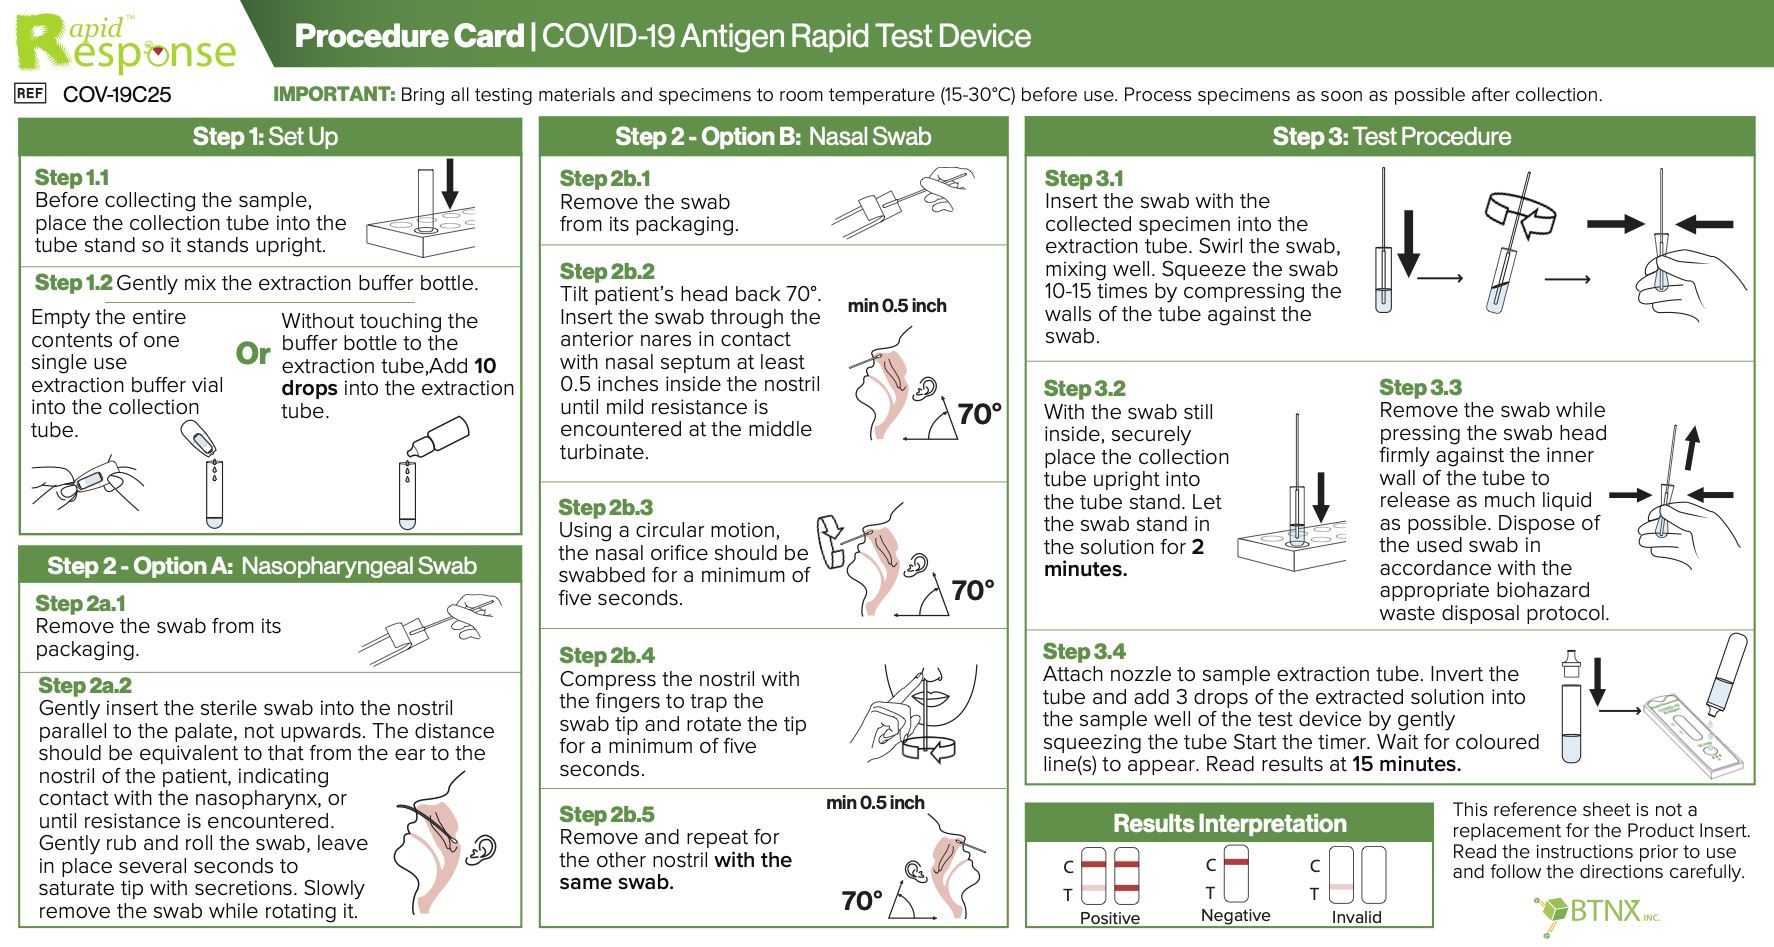 BTNX rapid covid-19 antigen test kit 5-pack English Instructions from PPE Supply Canada